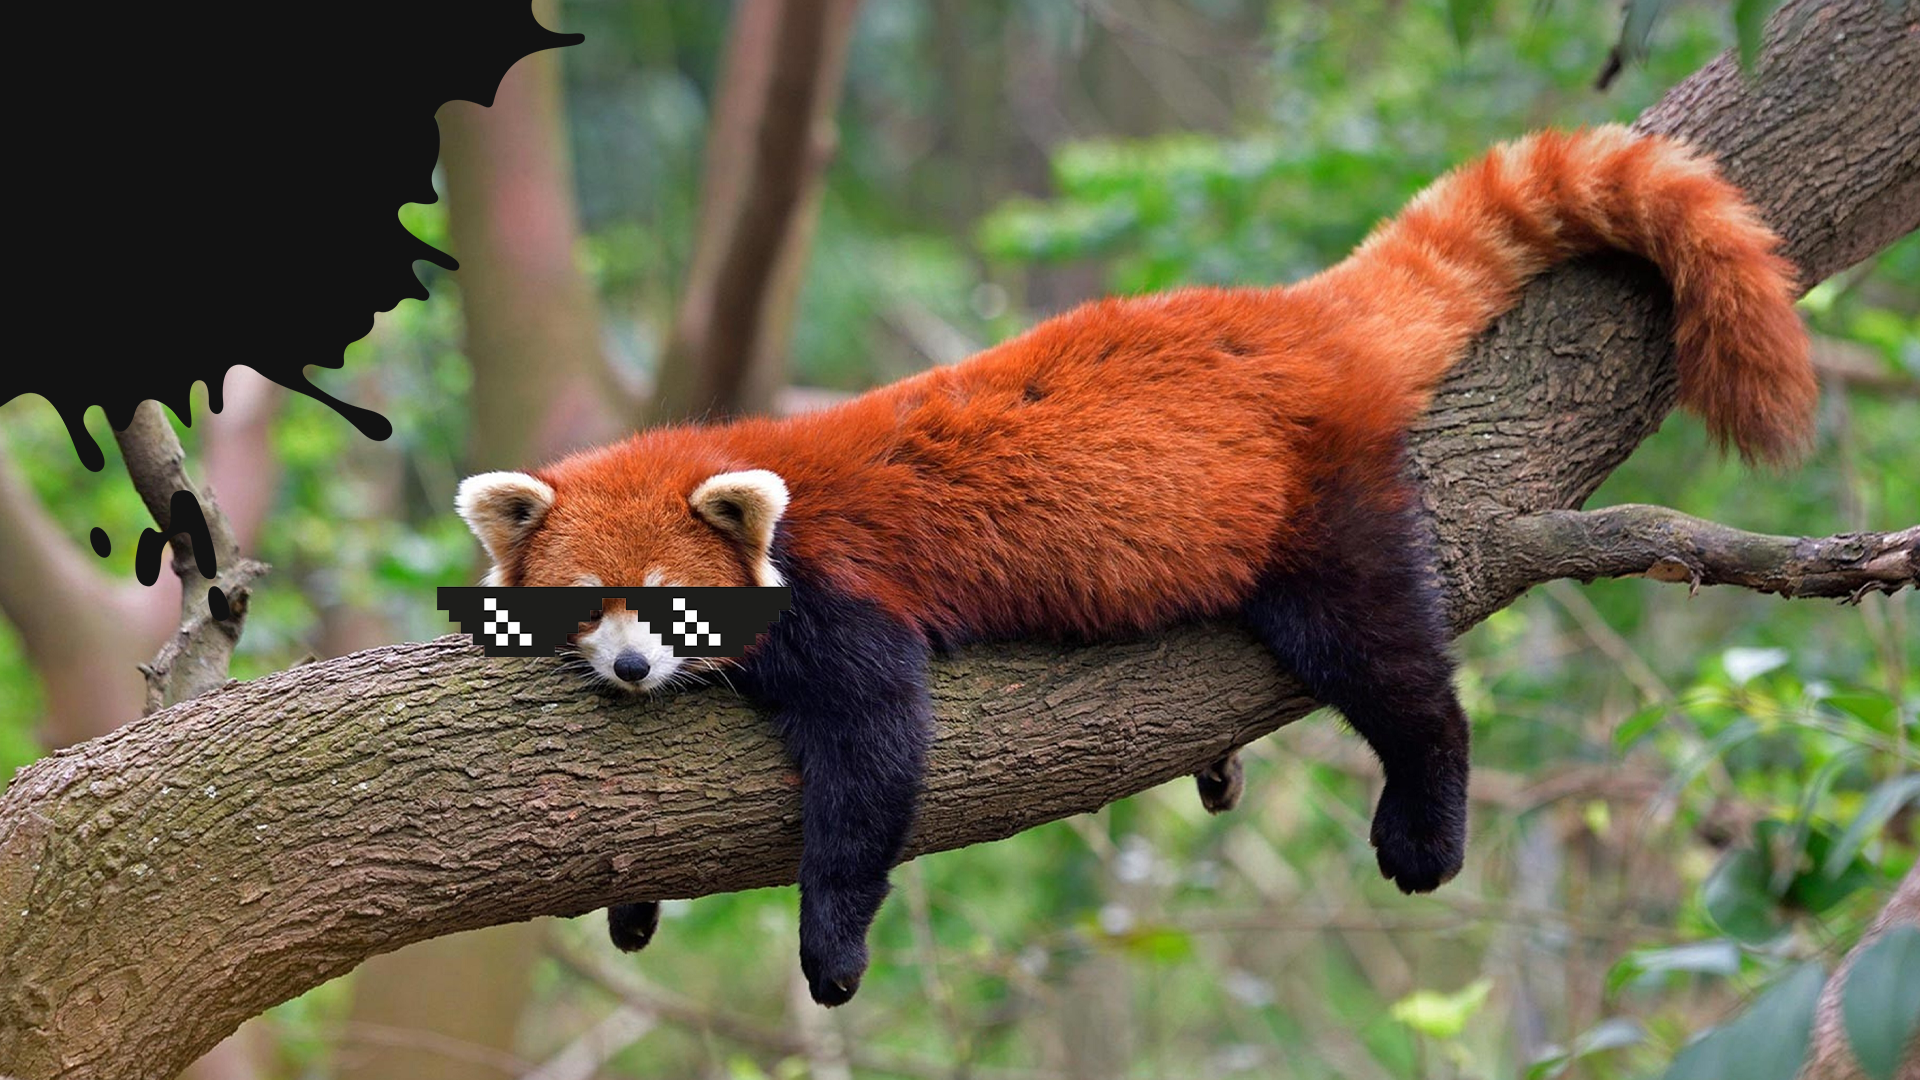 Red panda in shades with splat